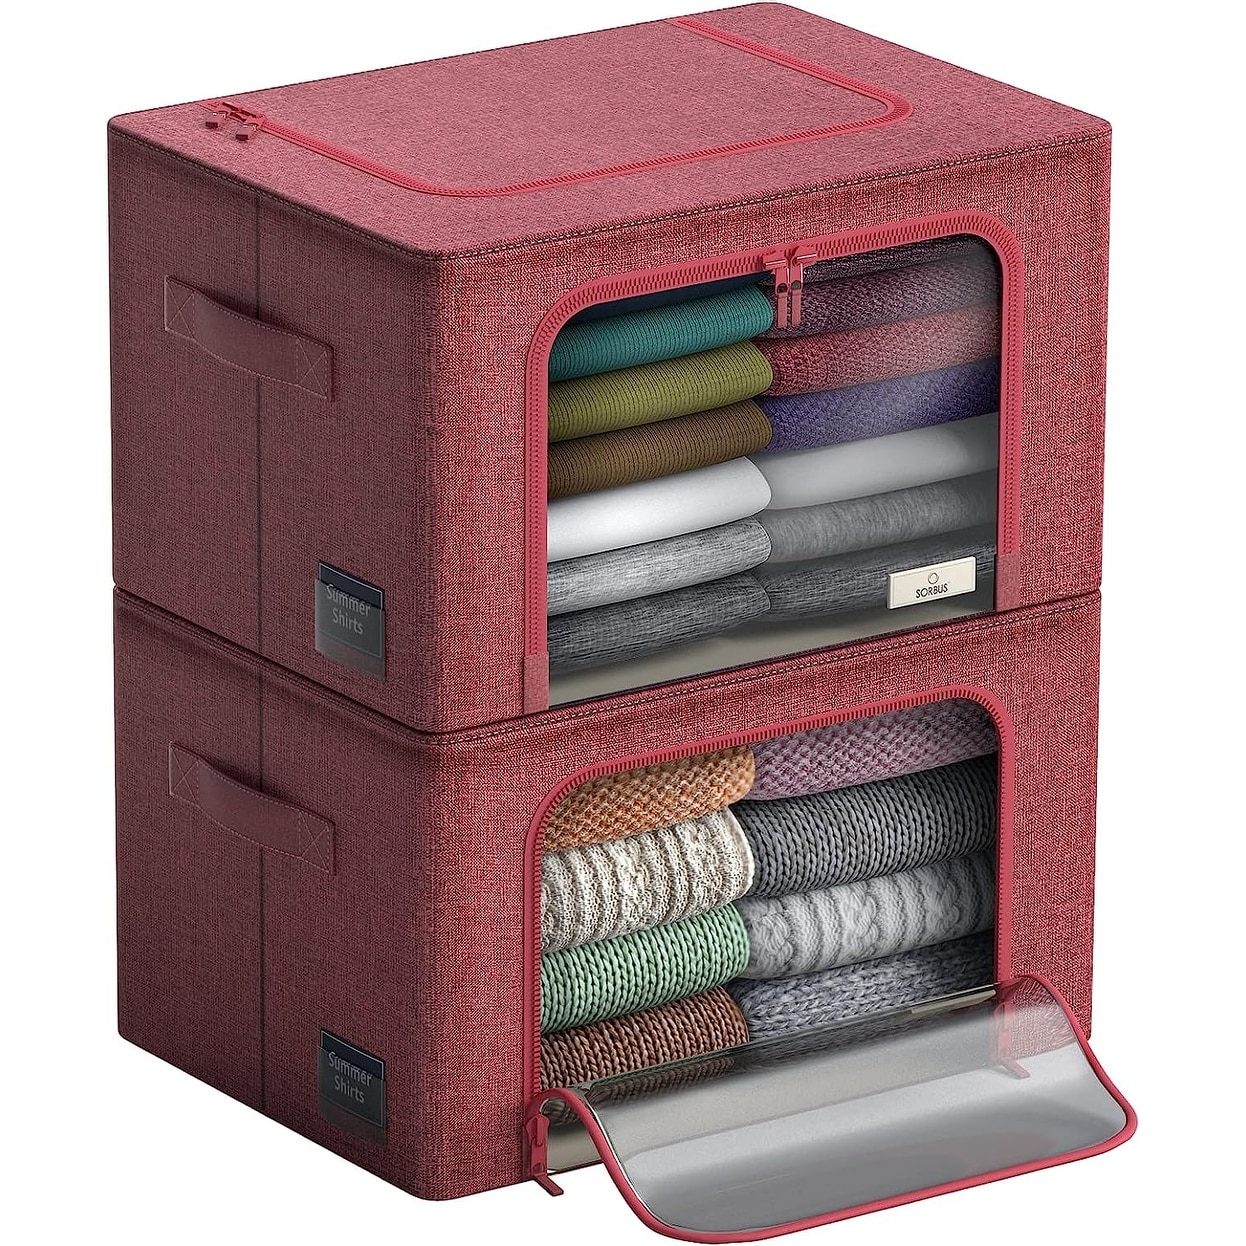 https://ak1.ostkcdn.com/images/products/is/images/direct/fb7057a75670317c6d12368899e76fe79b8cfff1/Storage-Bins%2C-Foldable-Stackable-Container-Organizer-Set-with-Large-Window-%26-Carry-Handles.jpg